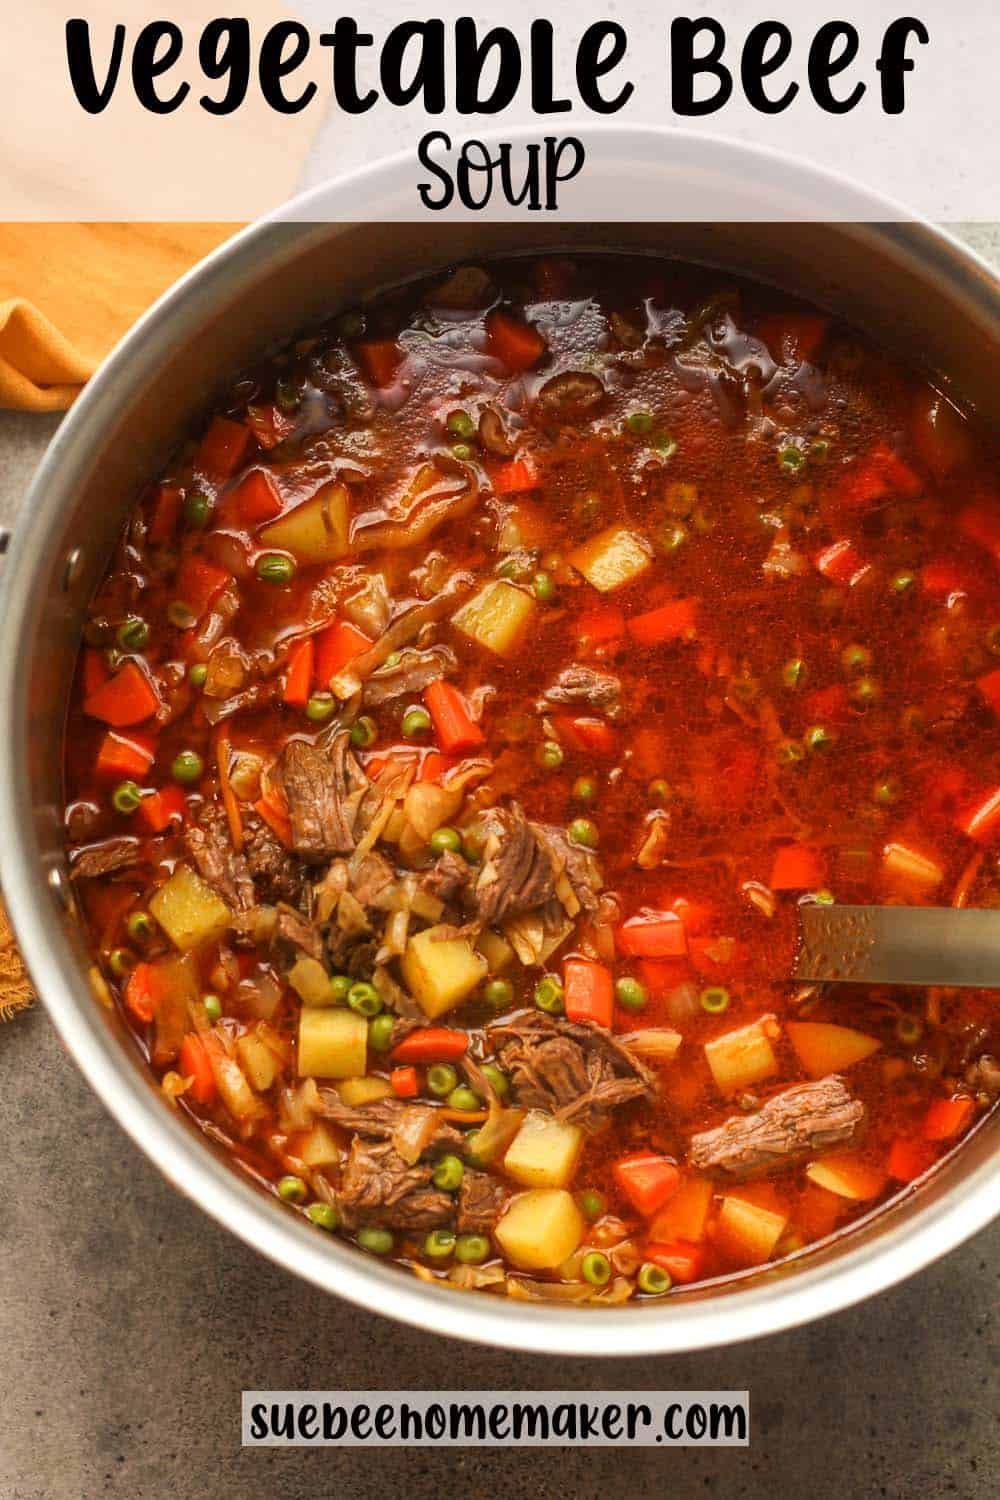 A large pot of vegetable beef soup with a ladle.